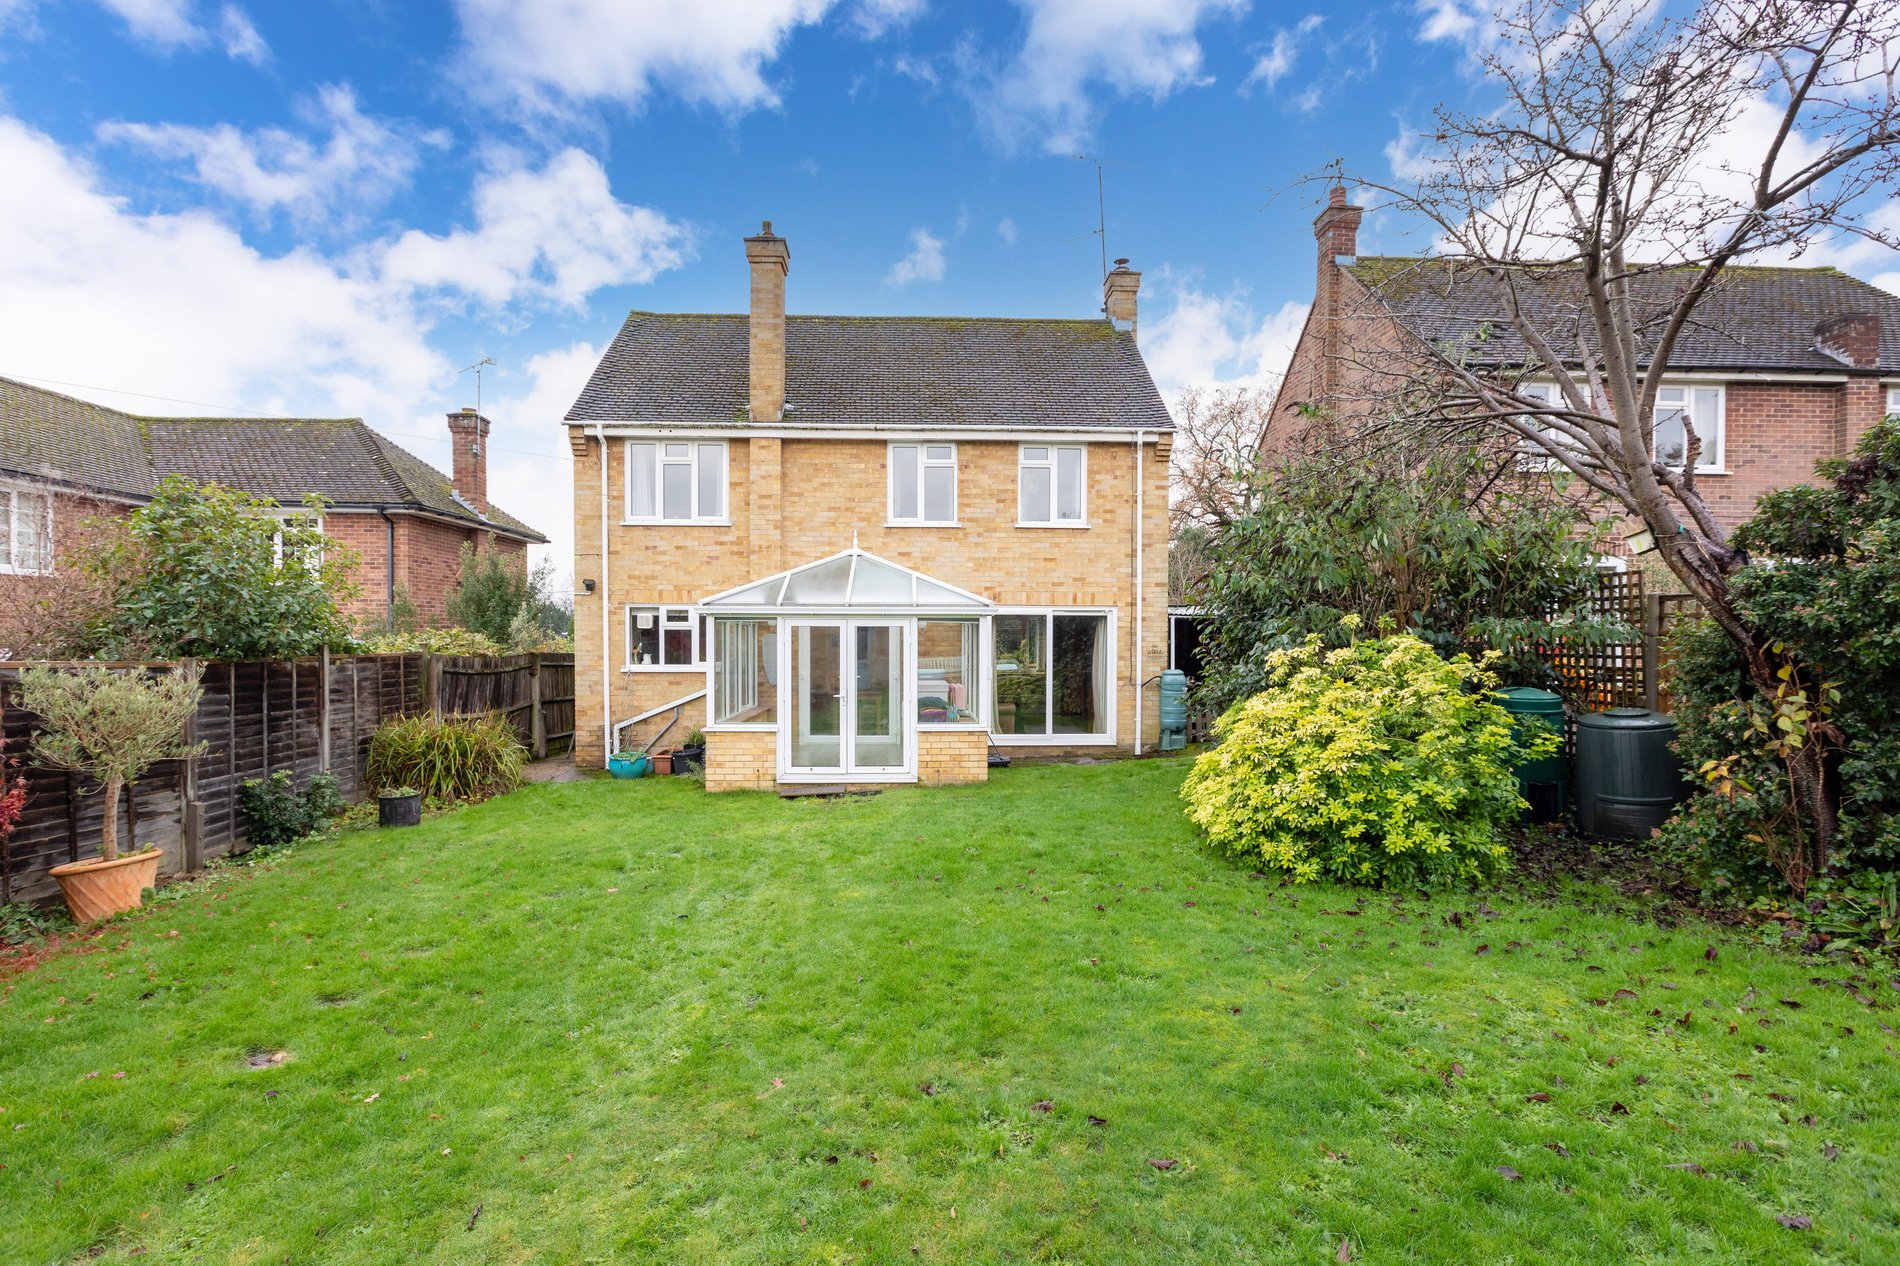 3 bed detached house for sale in Harvest Hill Road, Maidenhead - Property Image 1